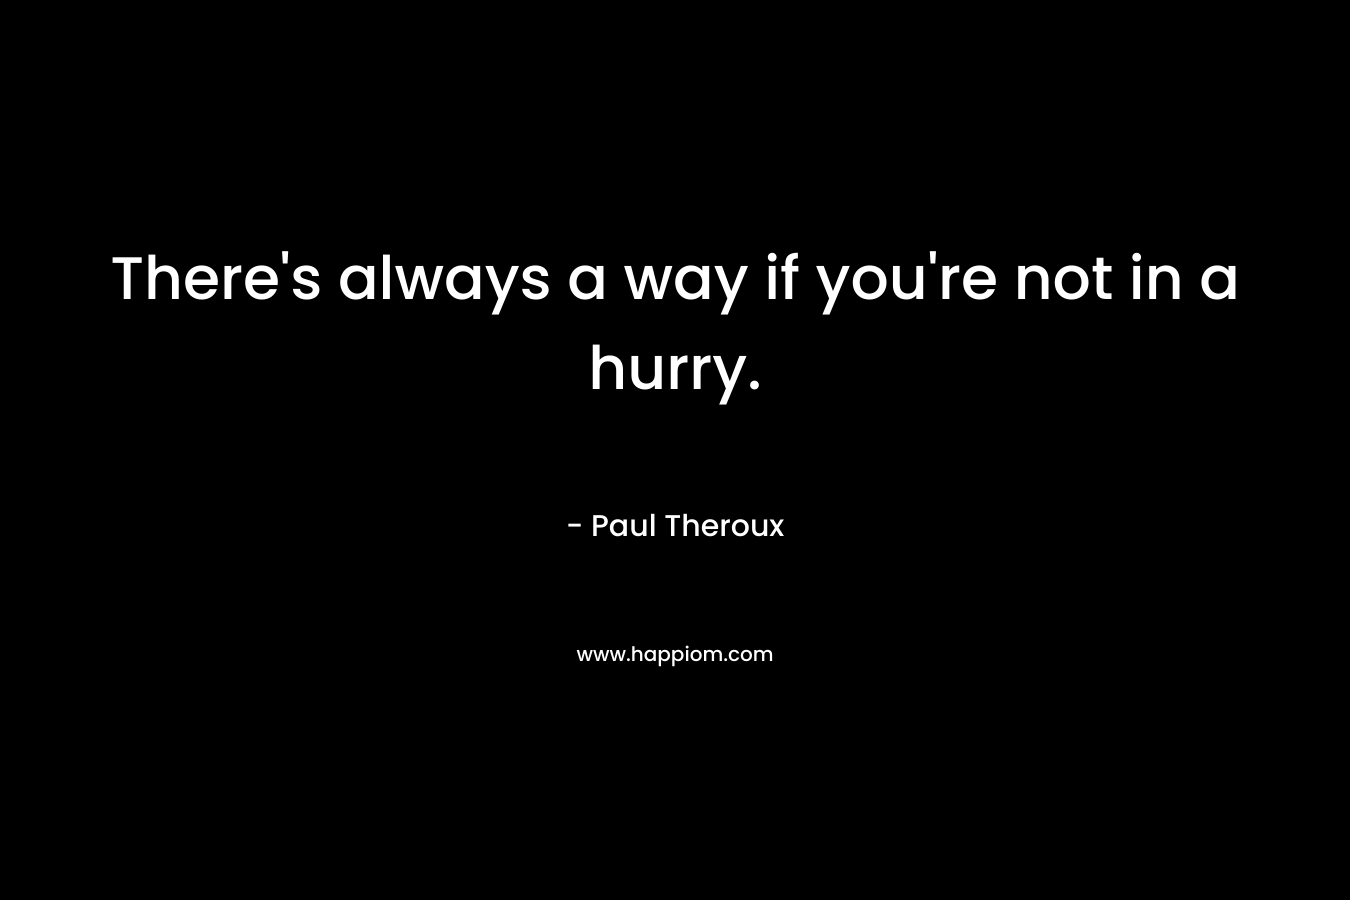 There’s always a way if you’re not in a hurry. – Paul Theroux